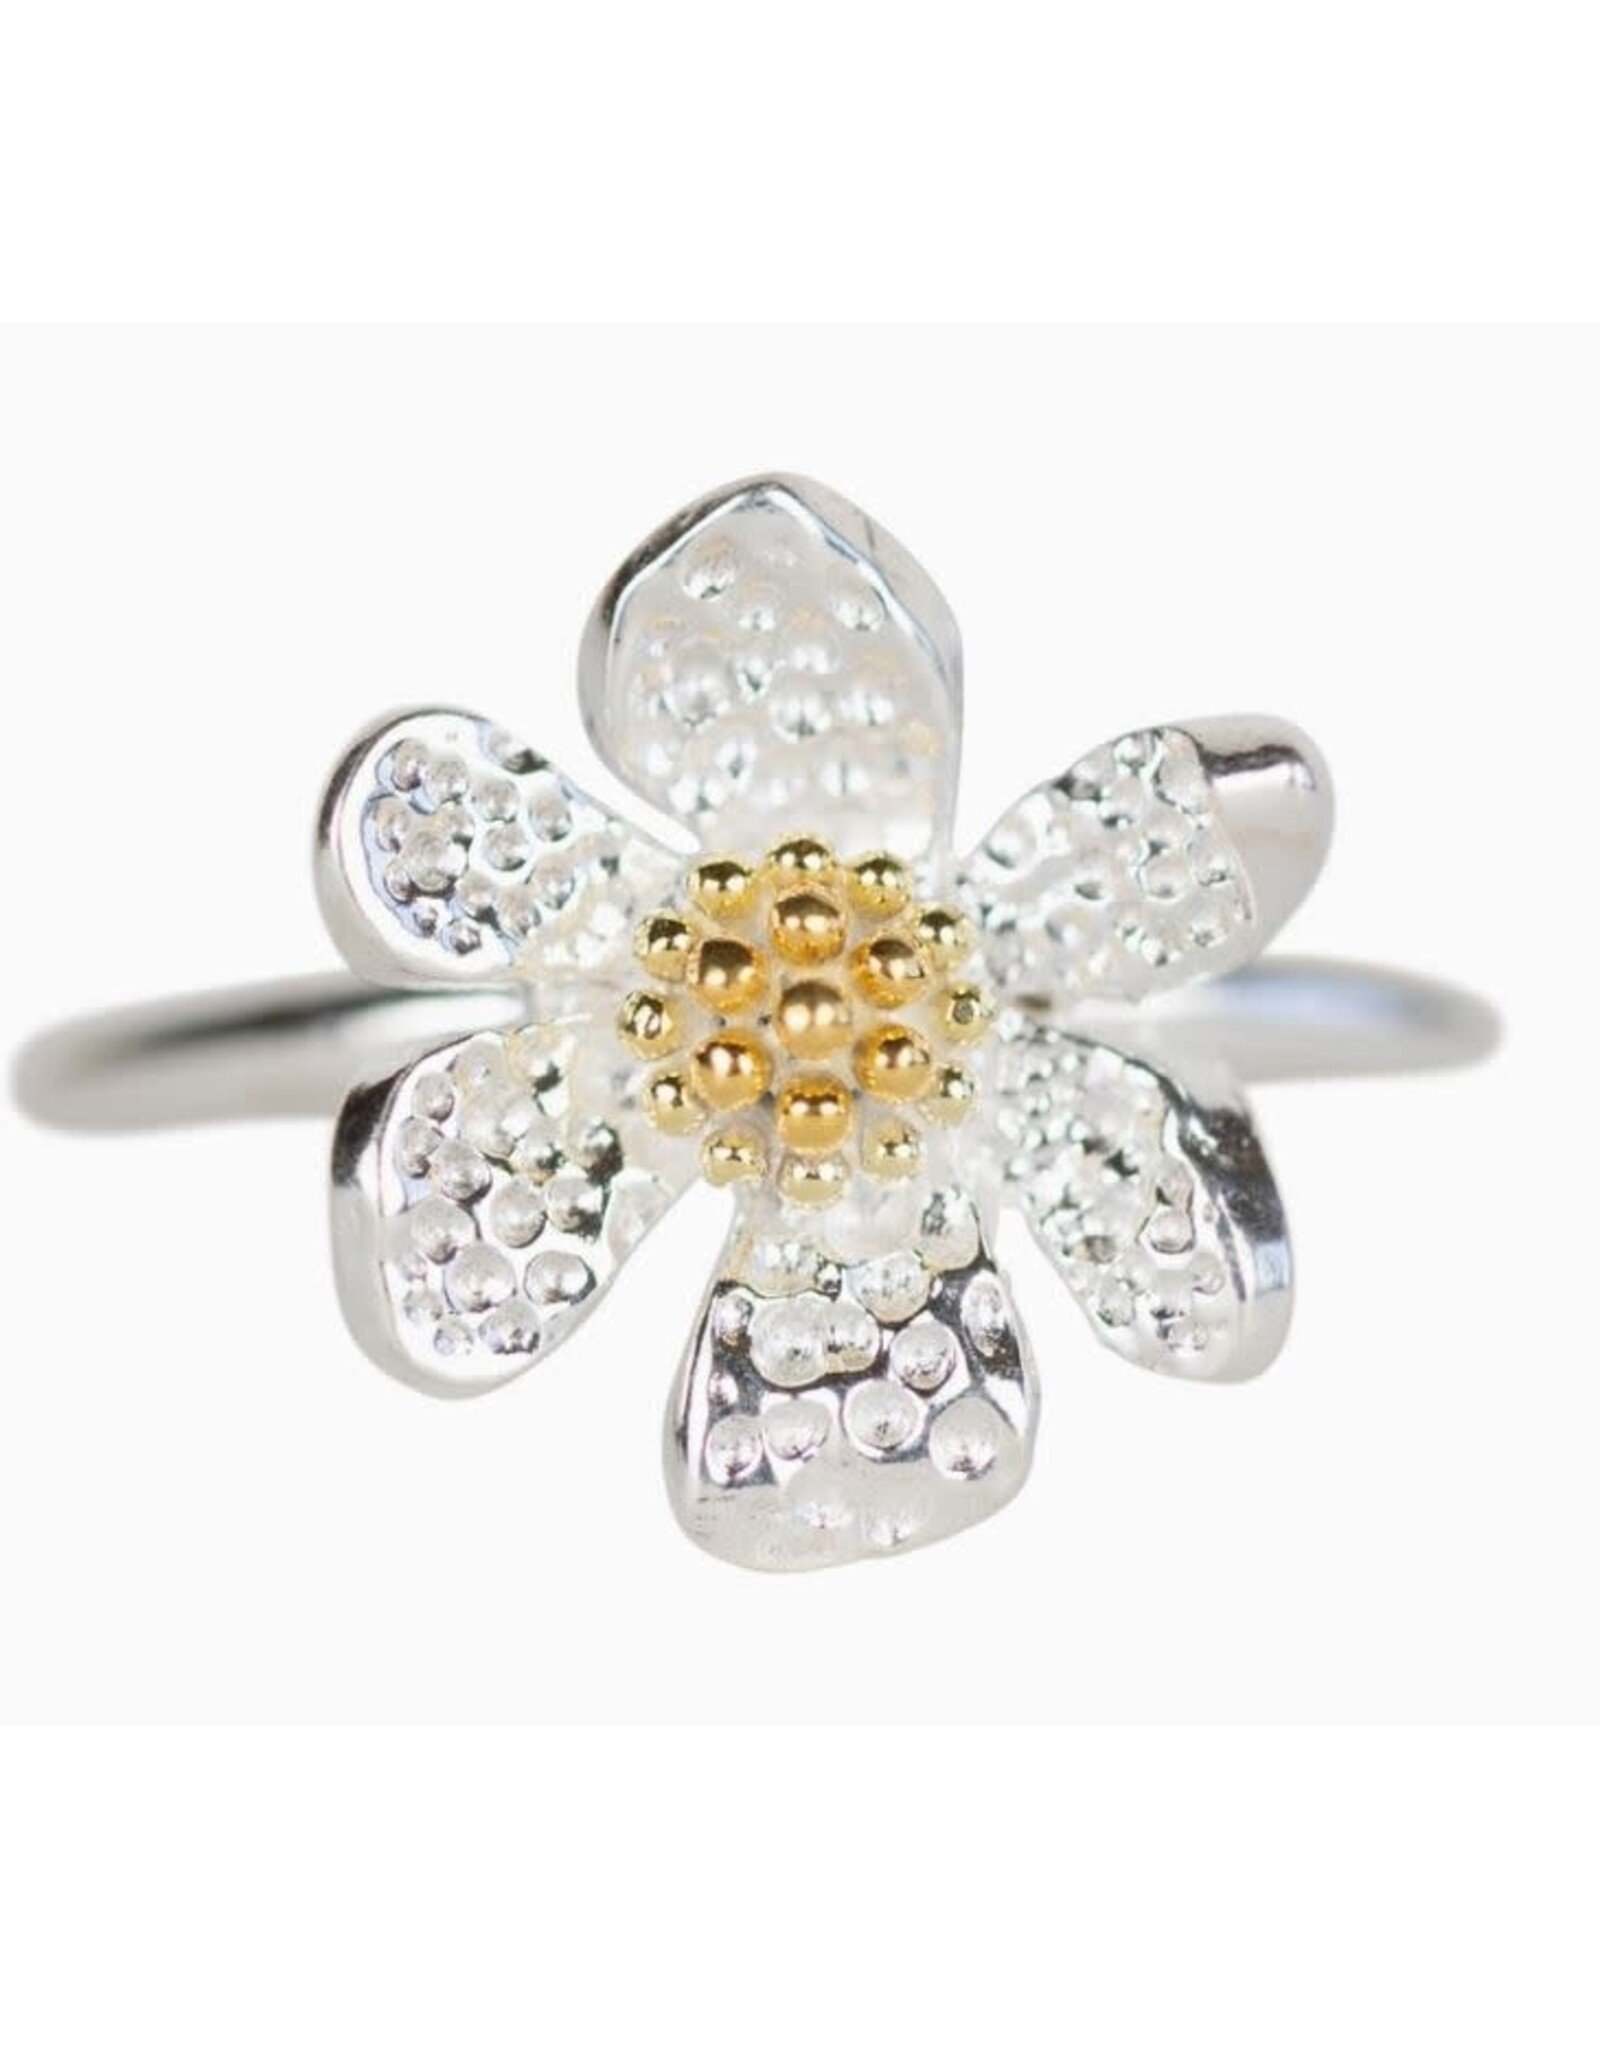 India Silver & Brass Flower Ring, India